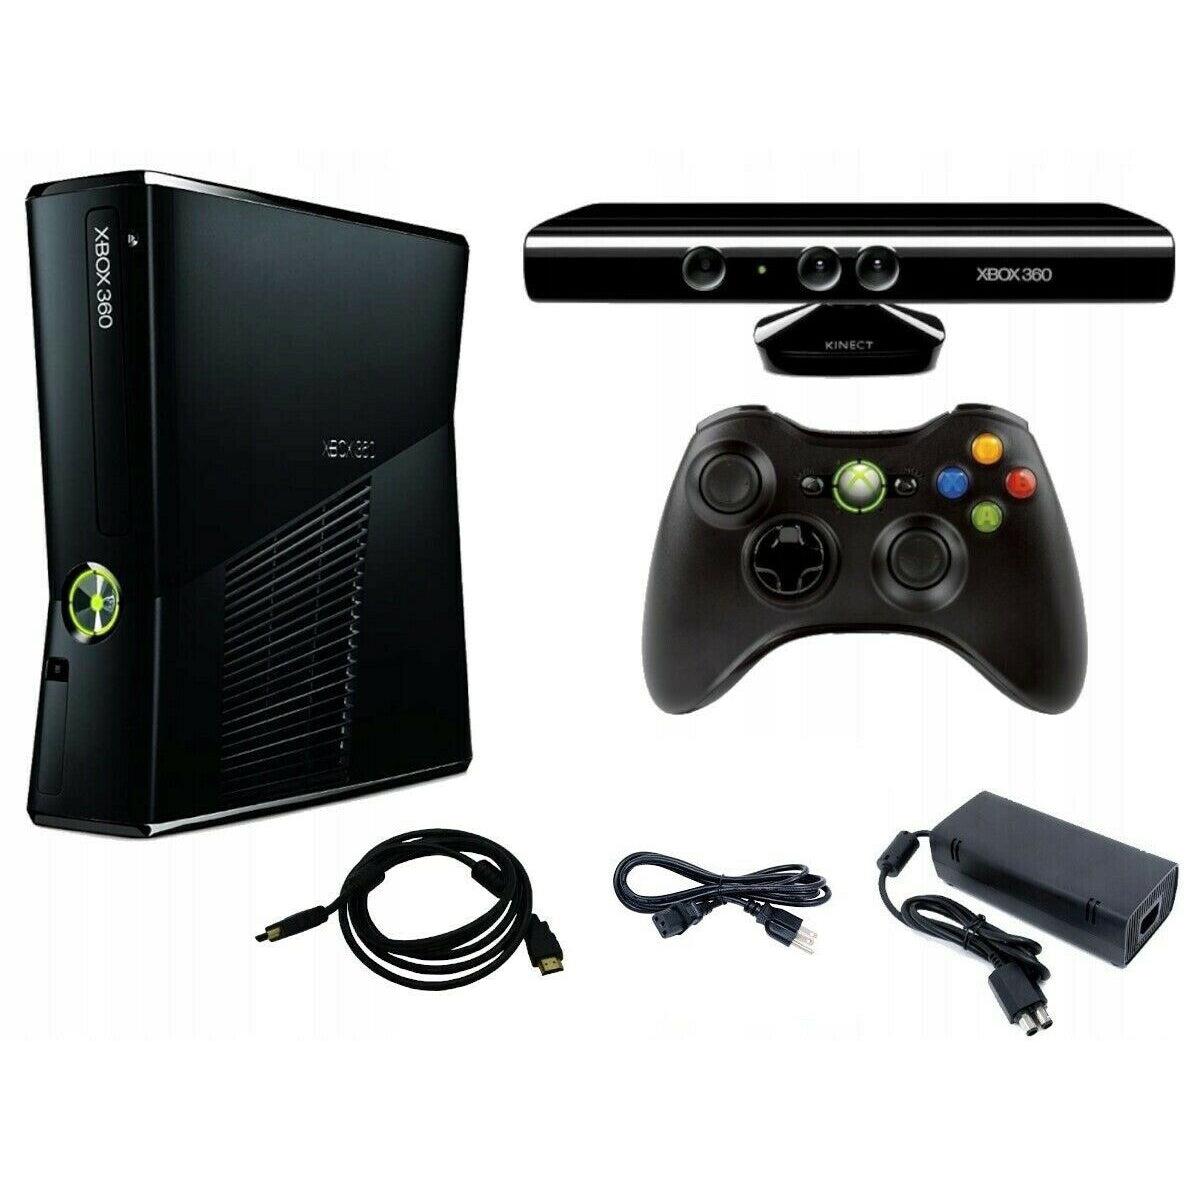 Microsoft Xbox 360 Slim Kinect Sensory Bar - Fable Journey Video Game Console Bundle from 2P Gaming